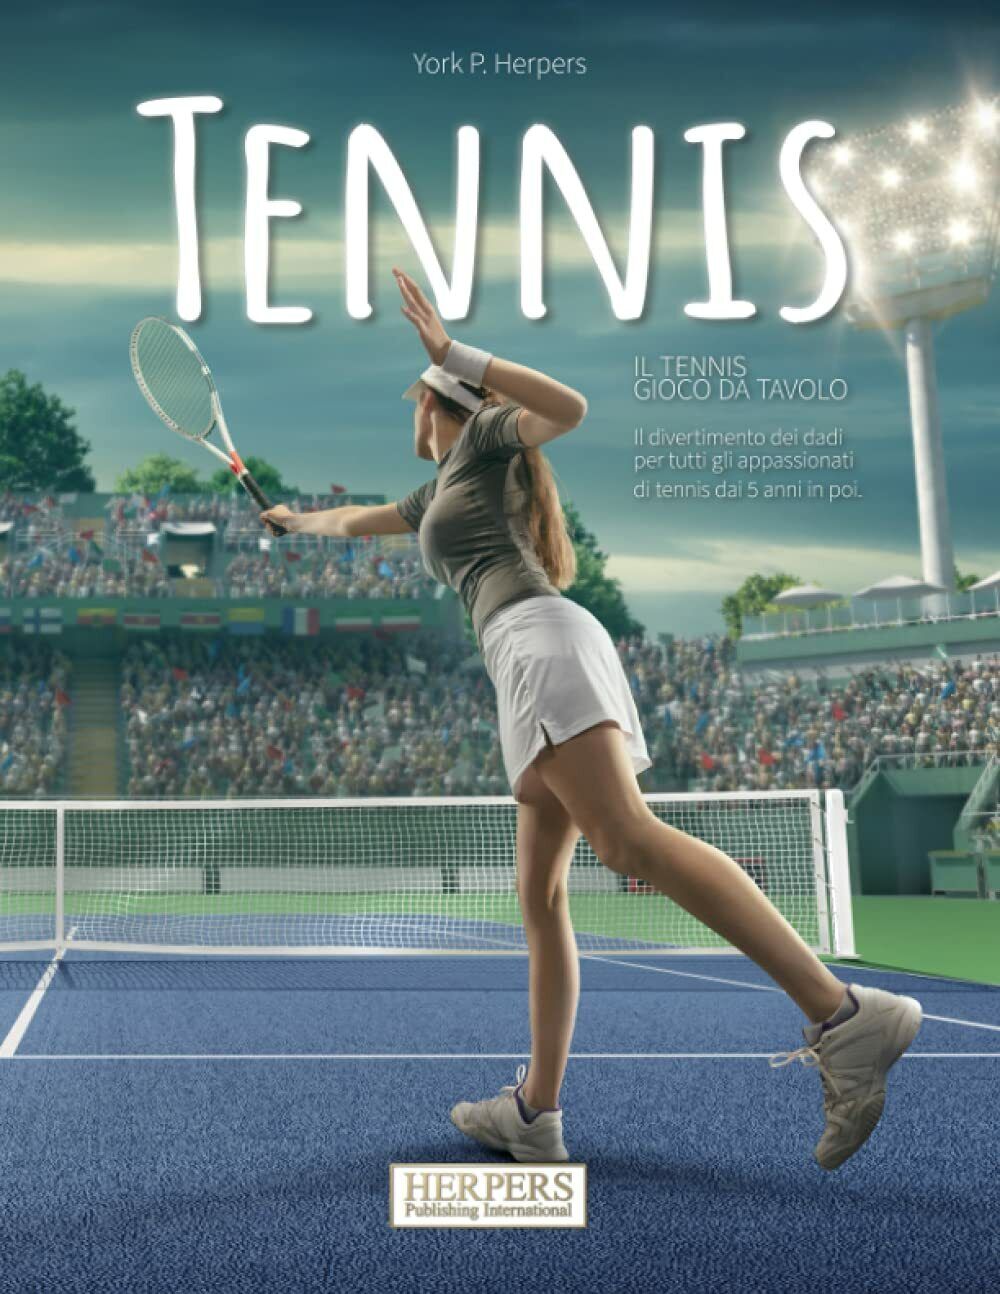 Tennis | Gioco da tavolo - Herpers York P. Herpers-Independently Published,2021